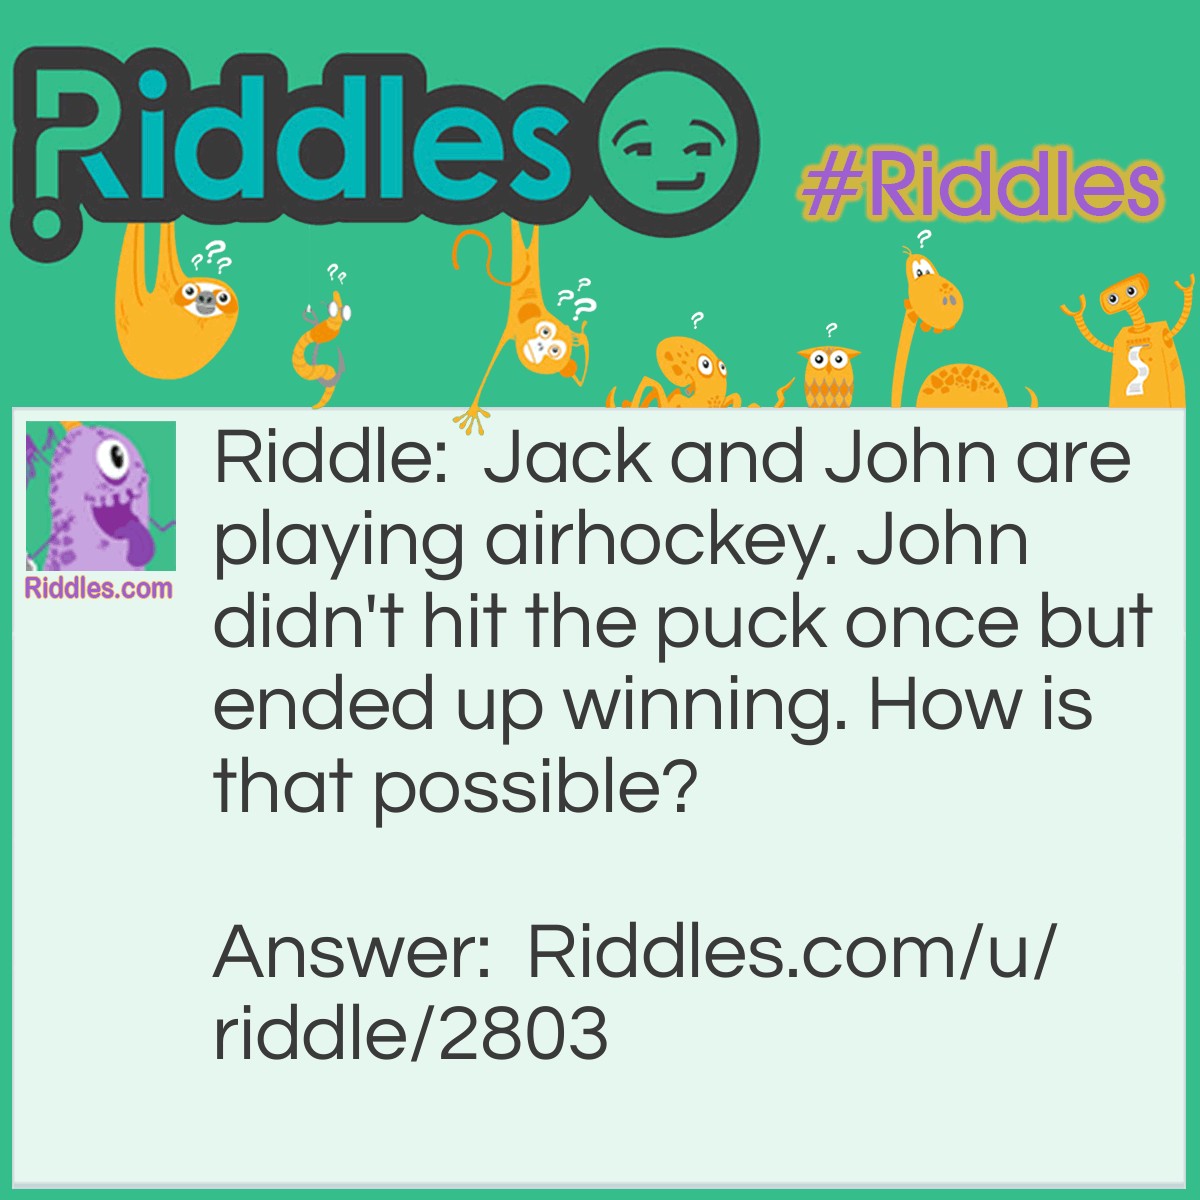 Riddle: Jack and John are playing airhockey. John didn't hit the puck once but ended up winning. How is that possible? Answer: Jack hit it and it kept on bouncing back into his goal.